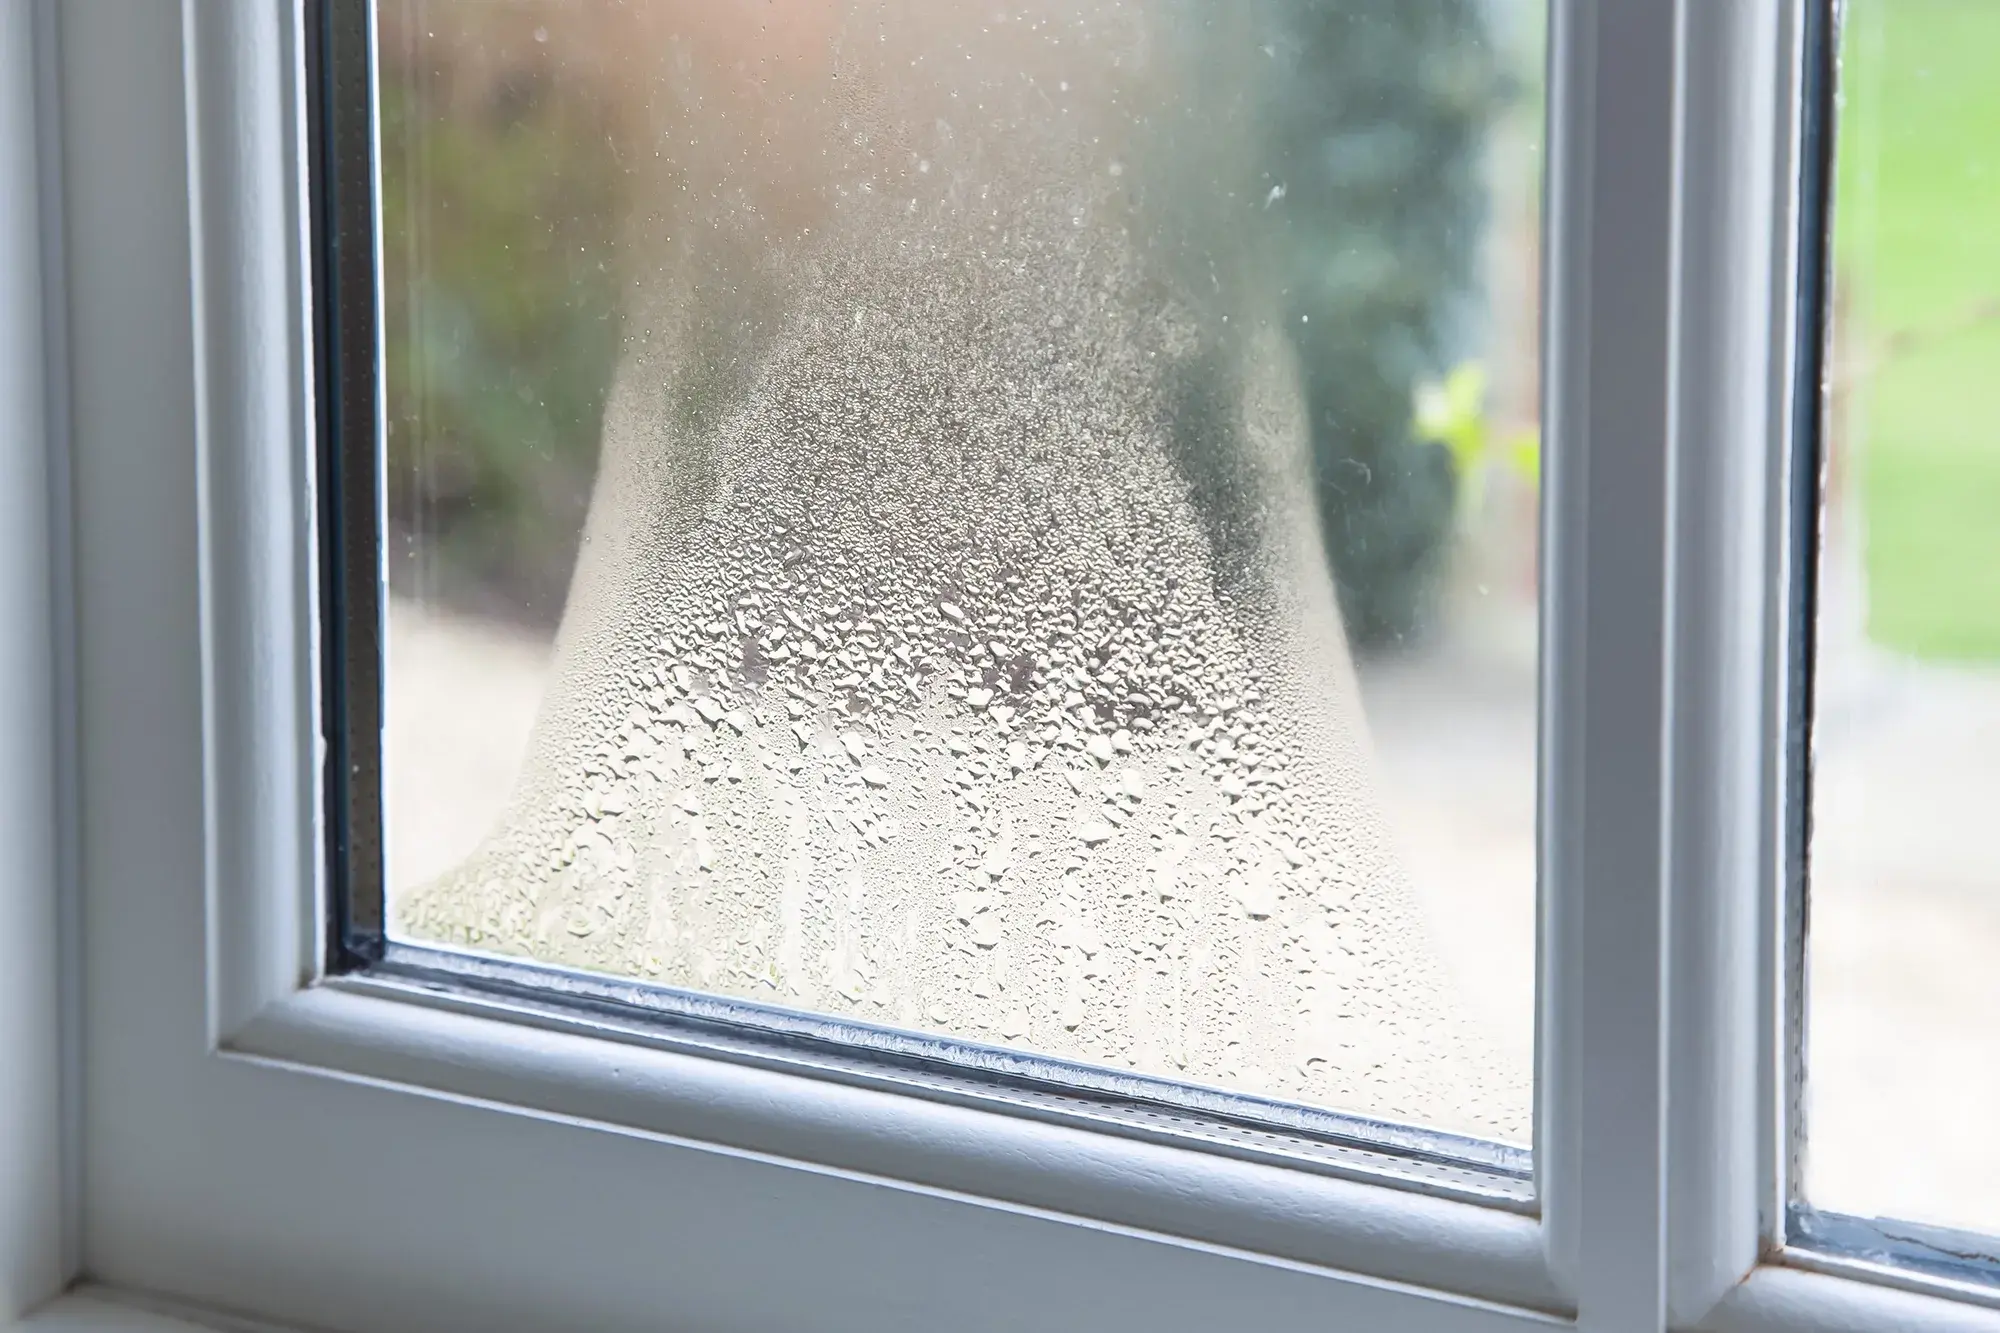 Preventing condensation is easy if you follow these rules.